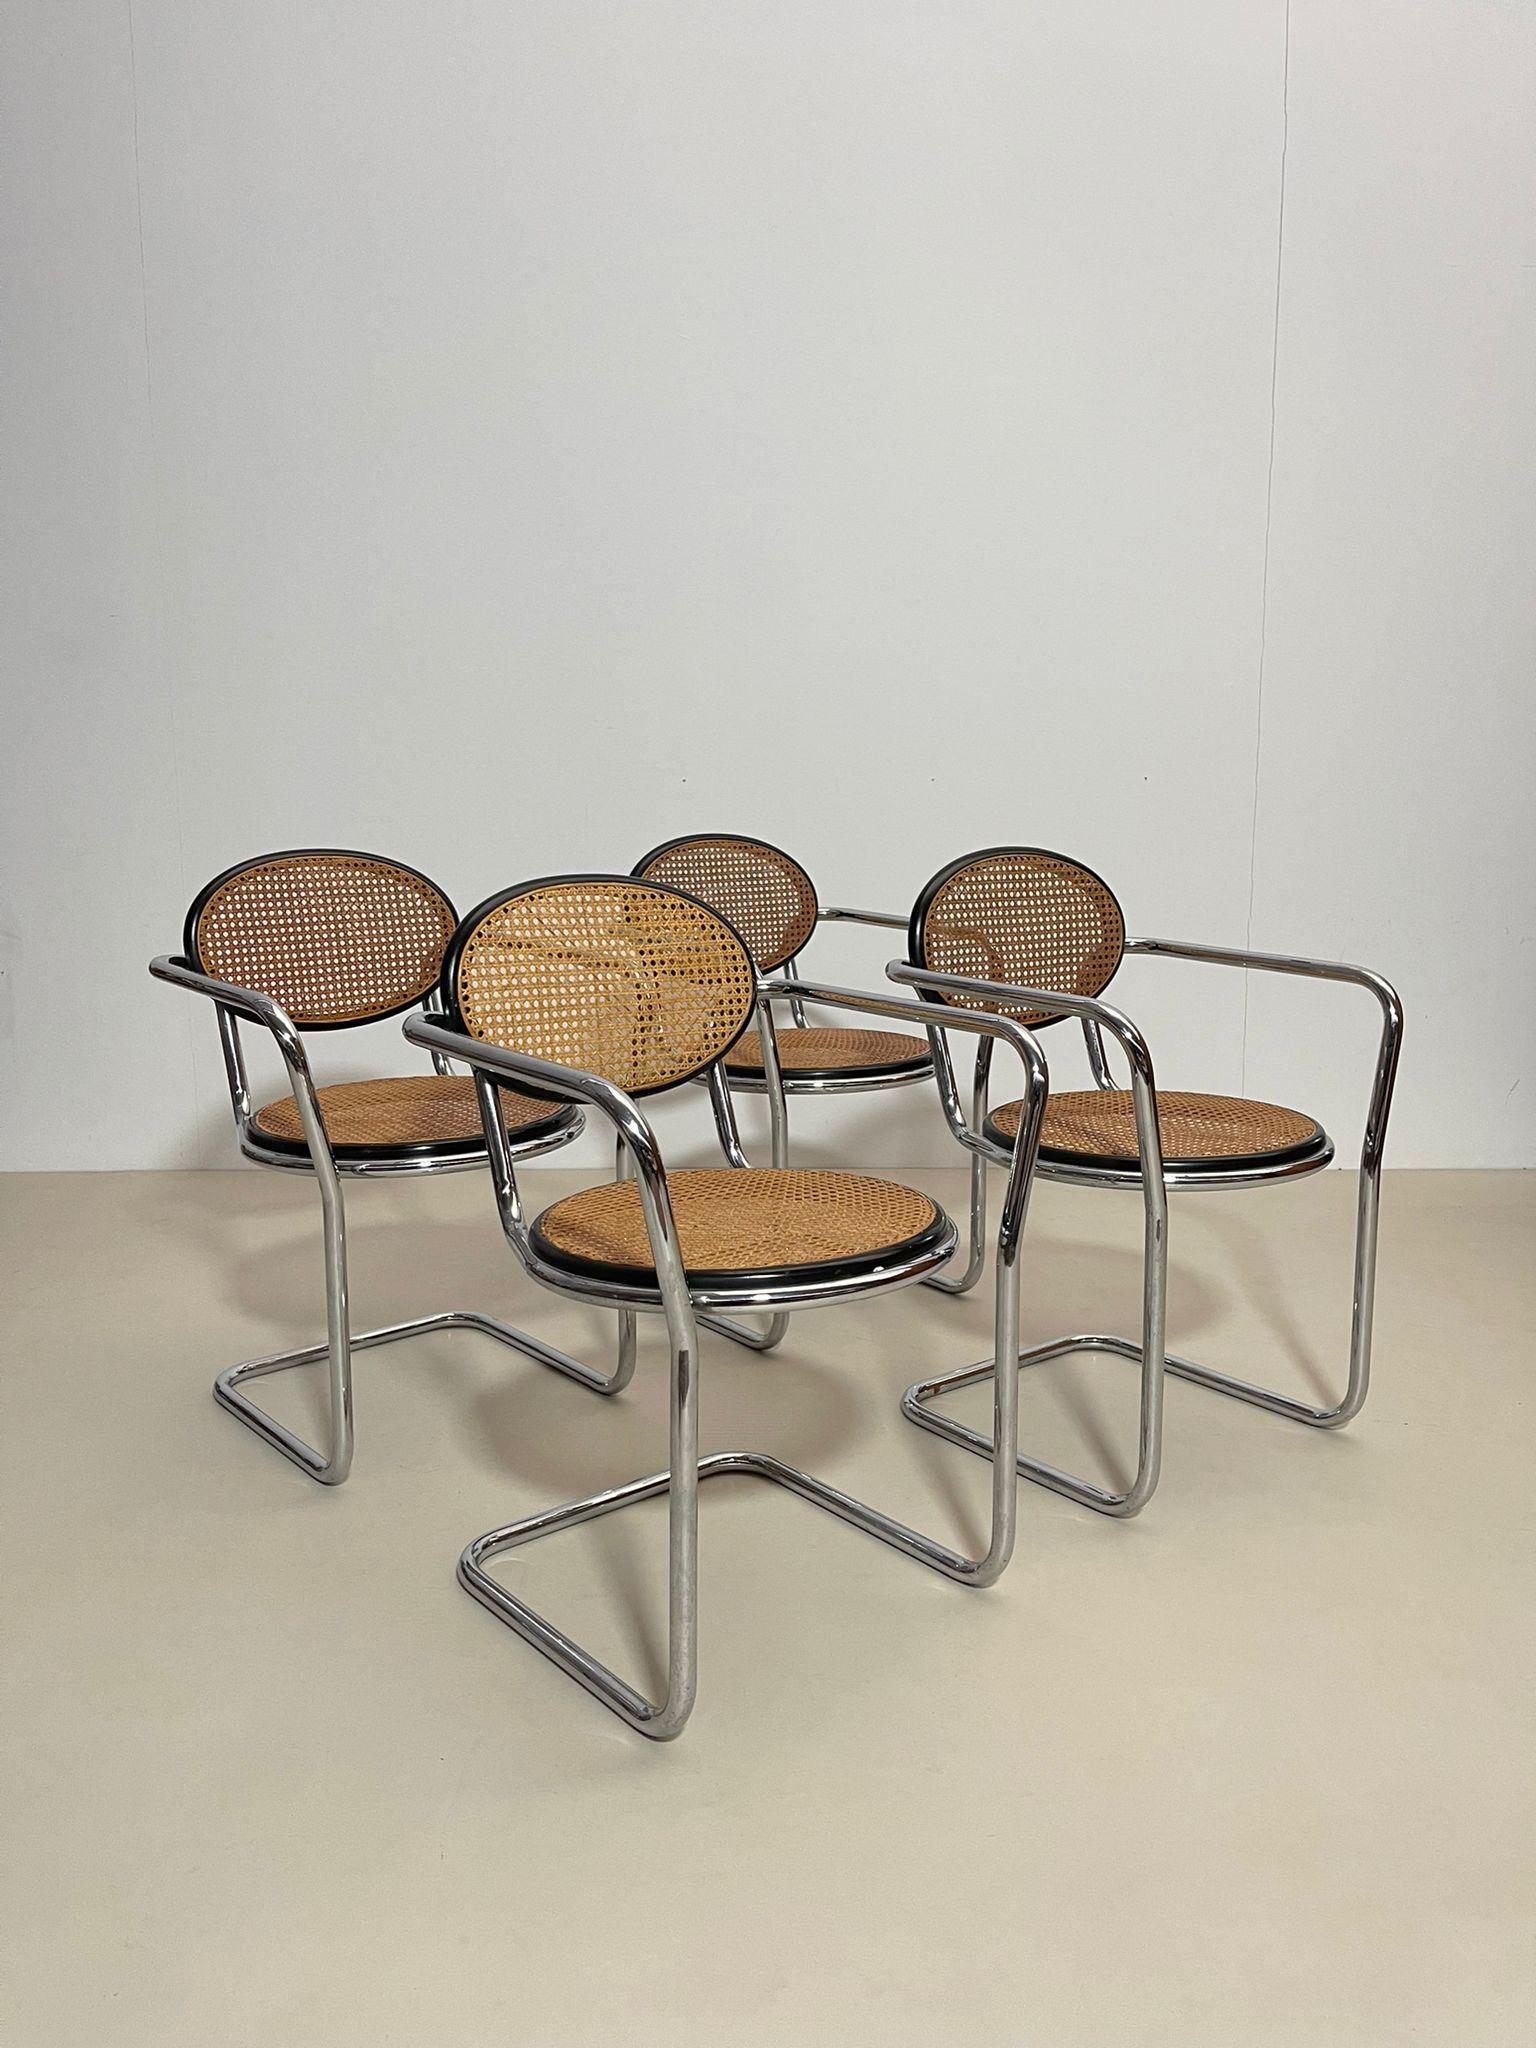 Mid-Century Modern Set of 4 Armchairs Marcel Breuer Style, Cane and Chrome  2